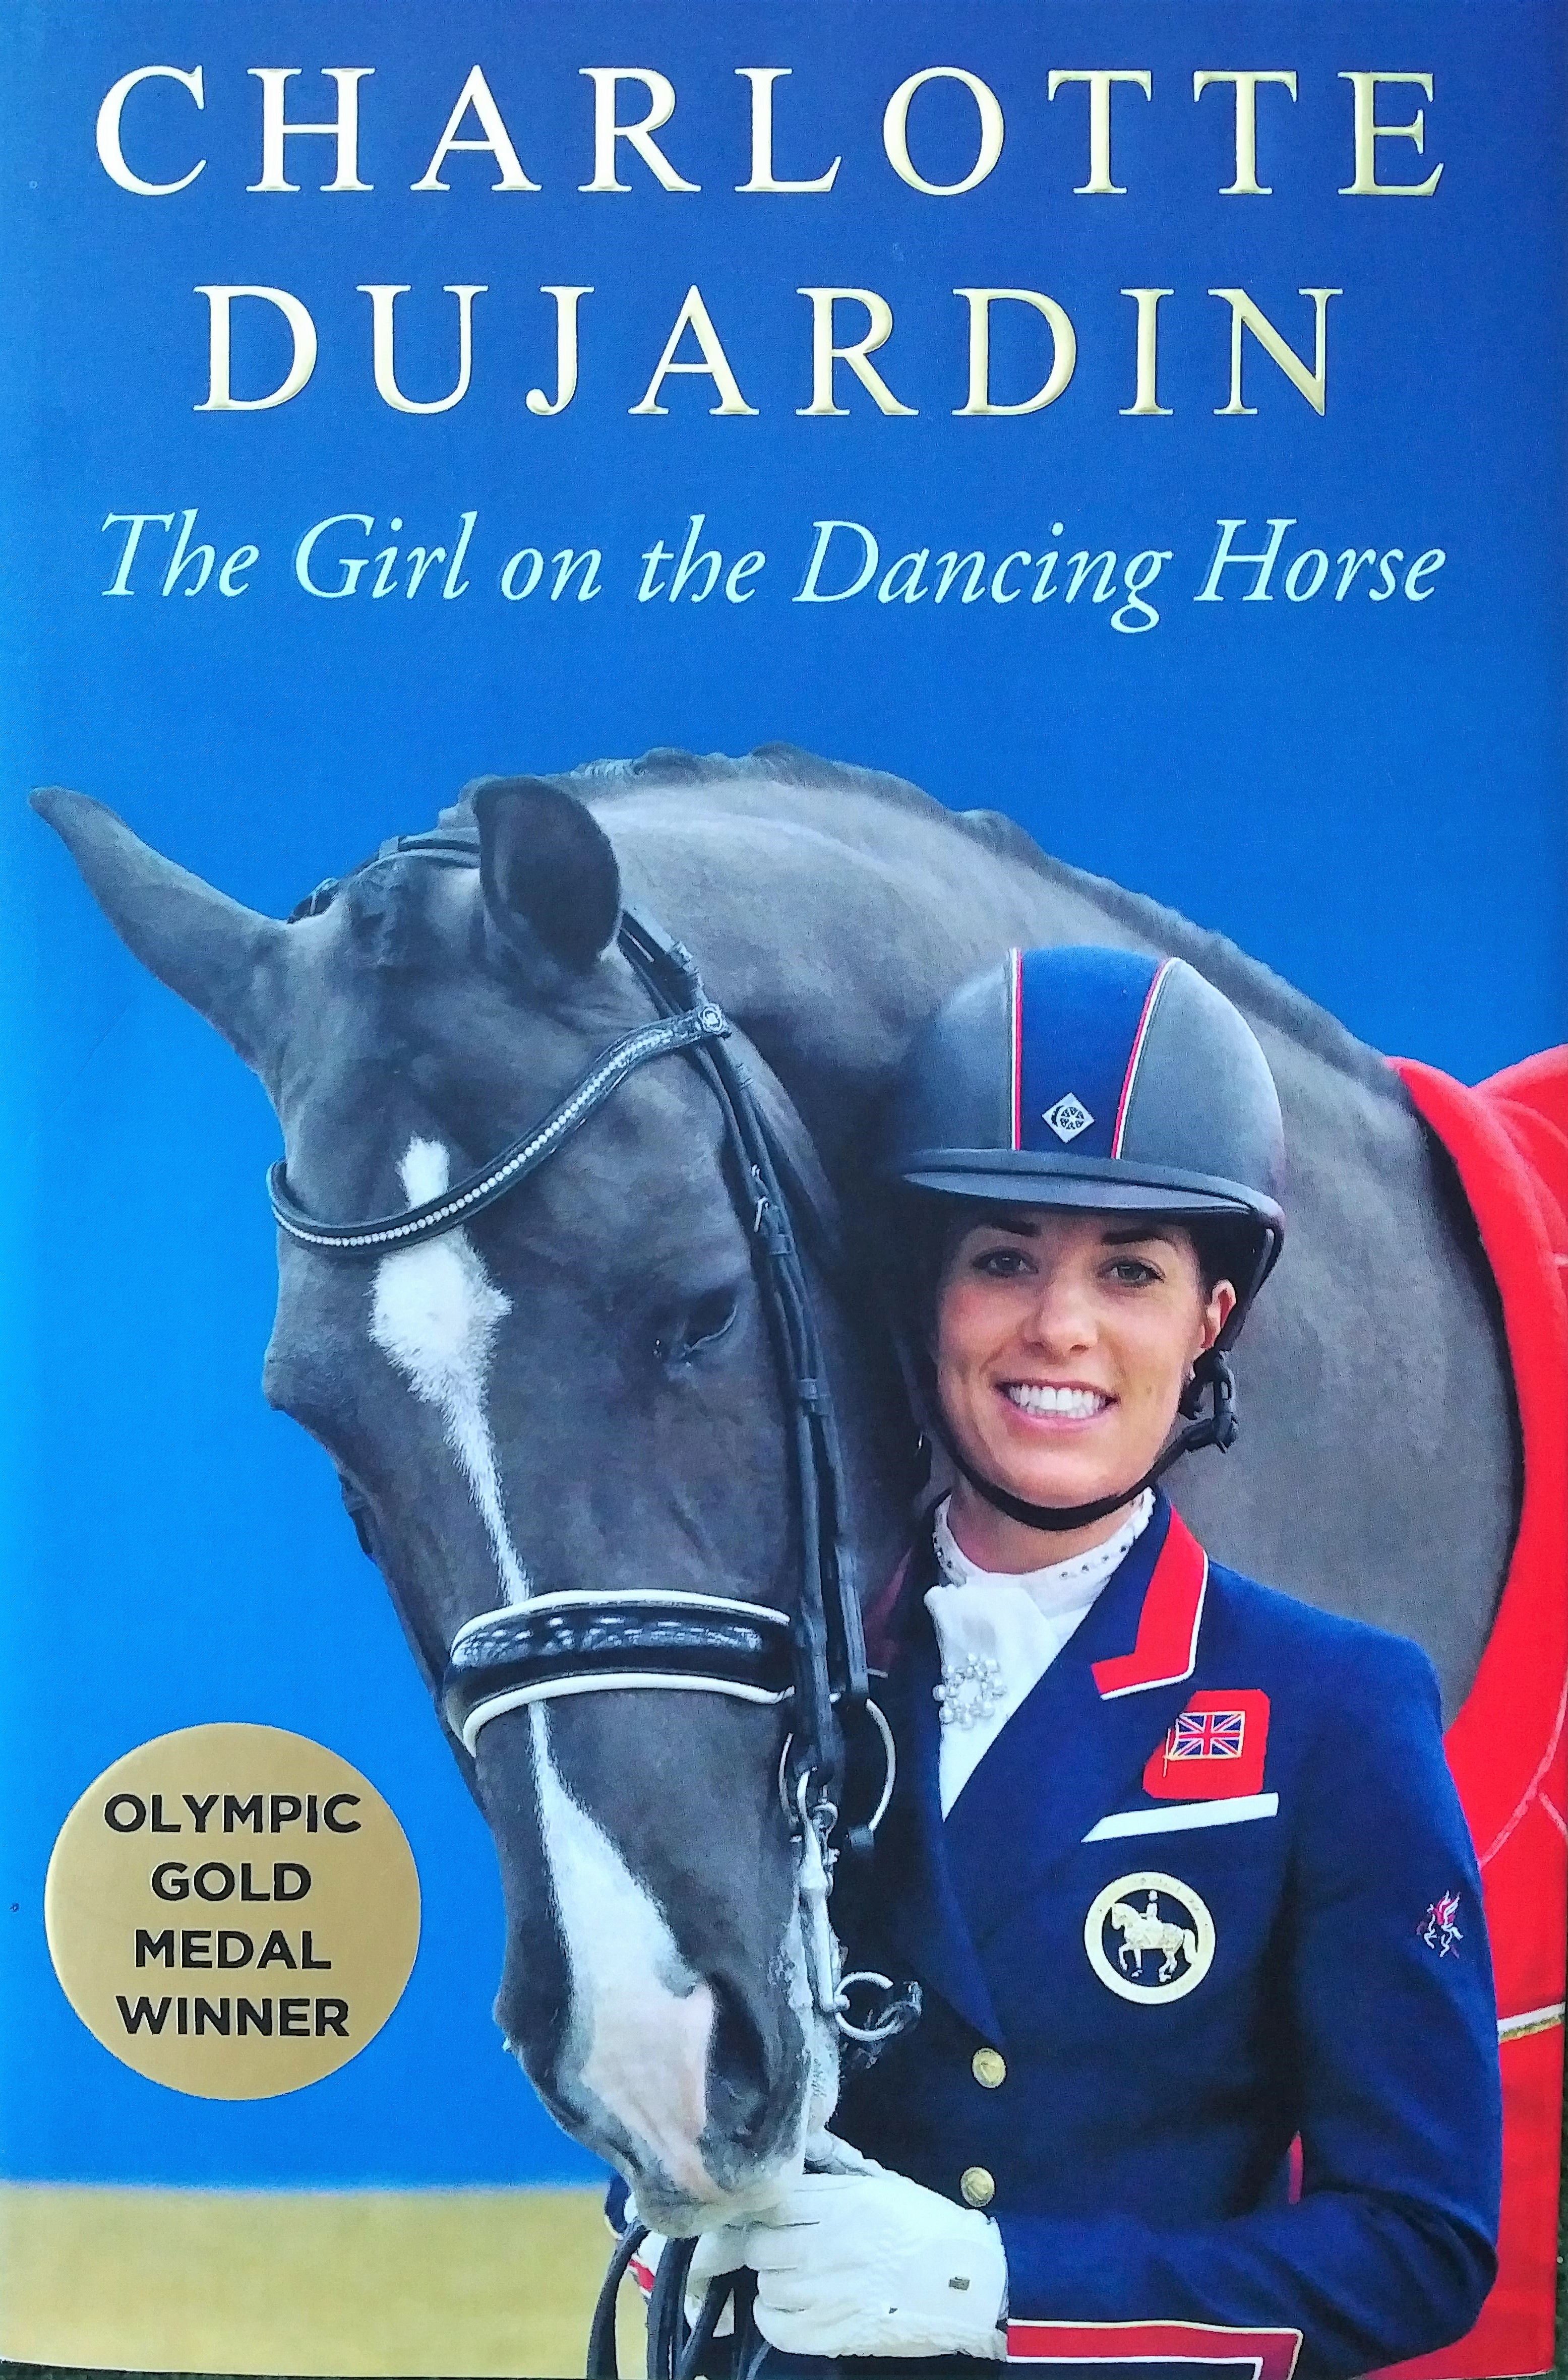 Book Review: Charlotte Dujardin The Girl on the Dancing Horse.